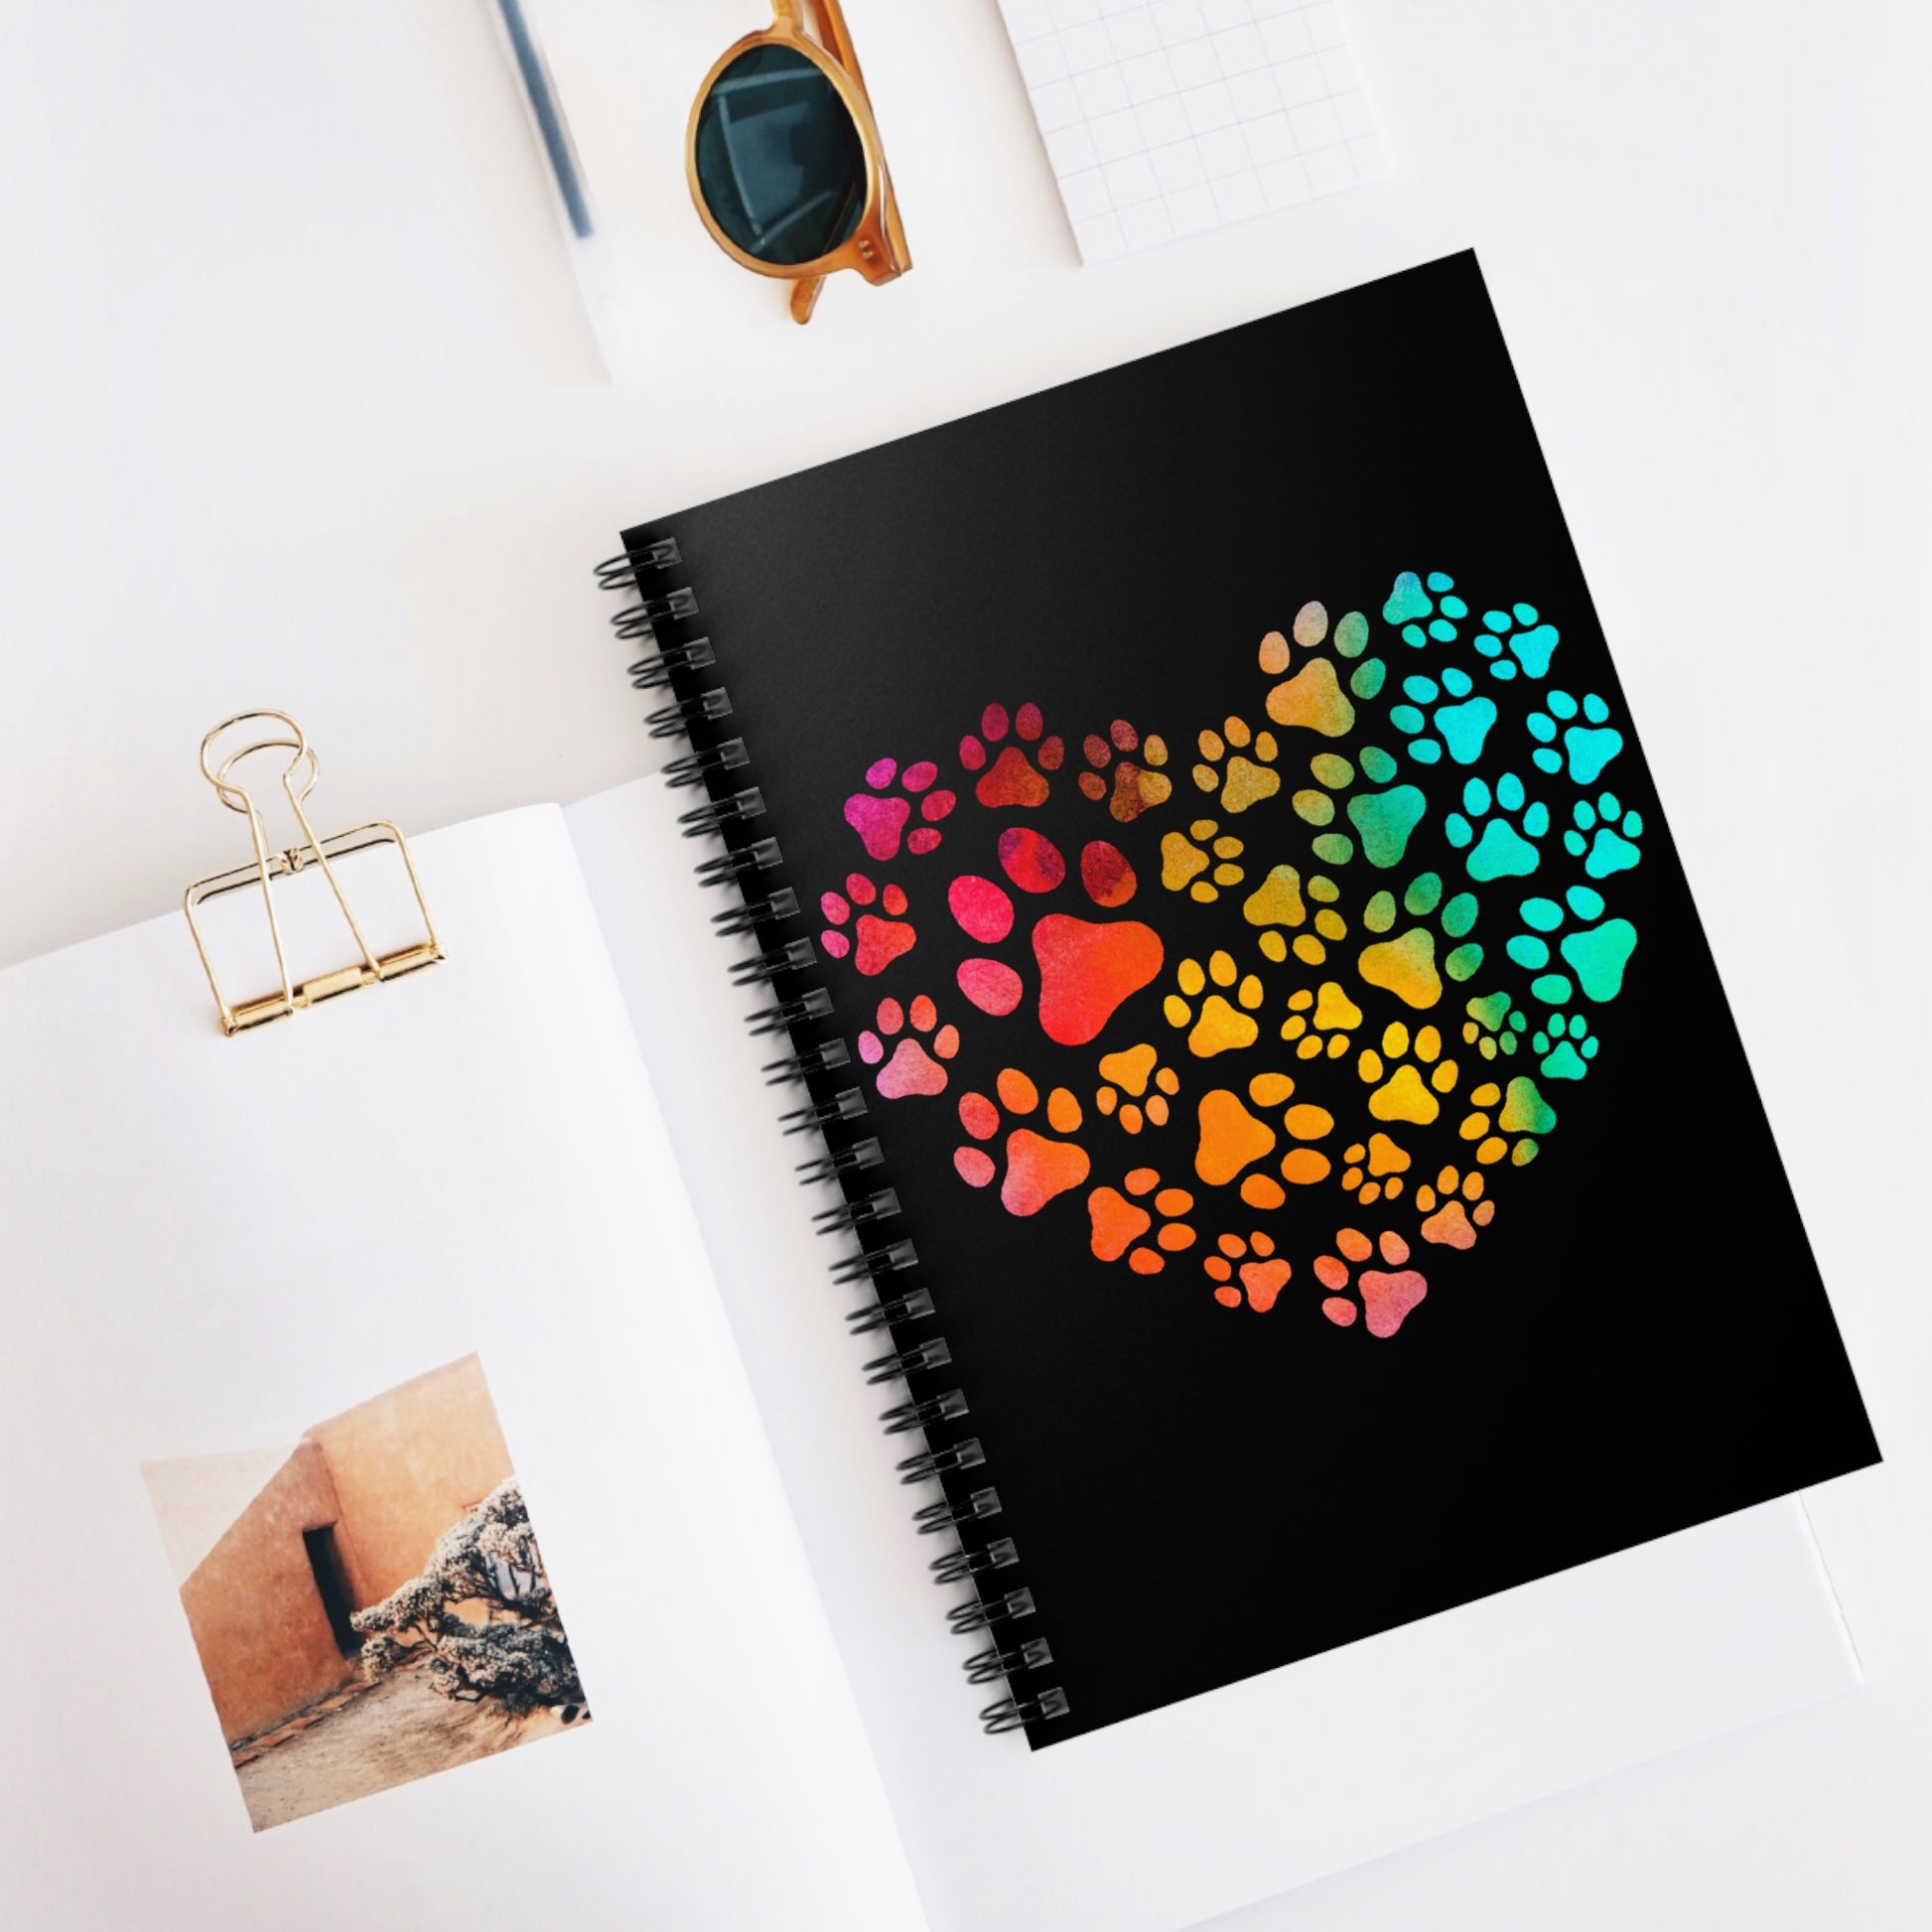 Rainbow Paw Heart: Spiral Notebook - Log Books - Journals - Diaries - and More Custom Printed by TheGlassyLass